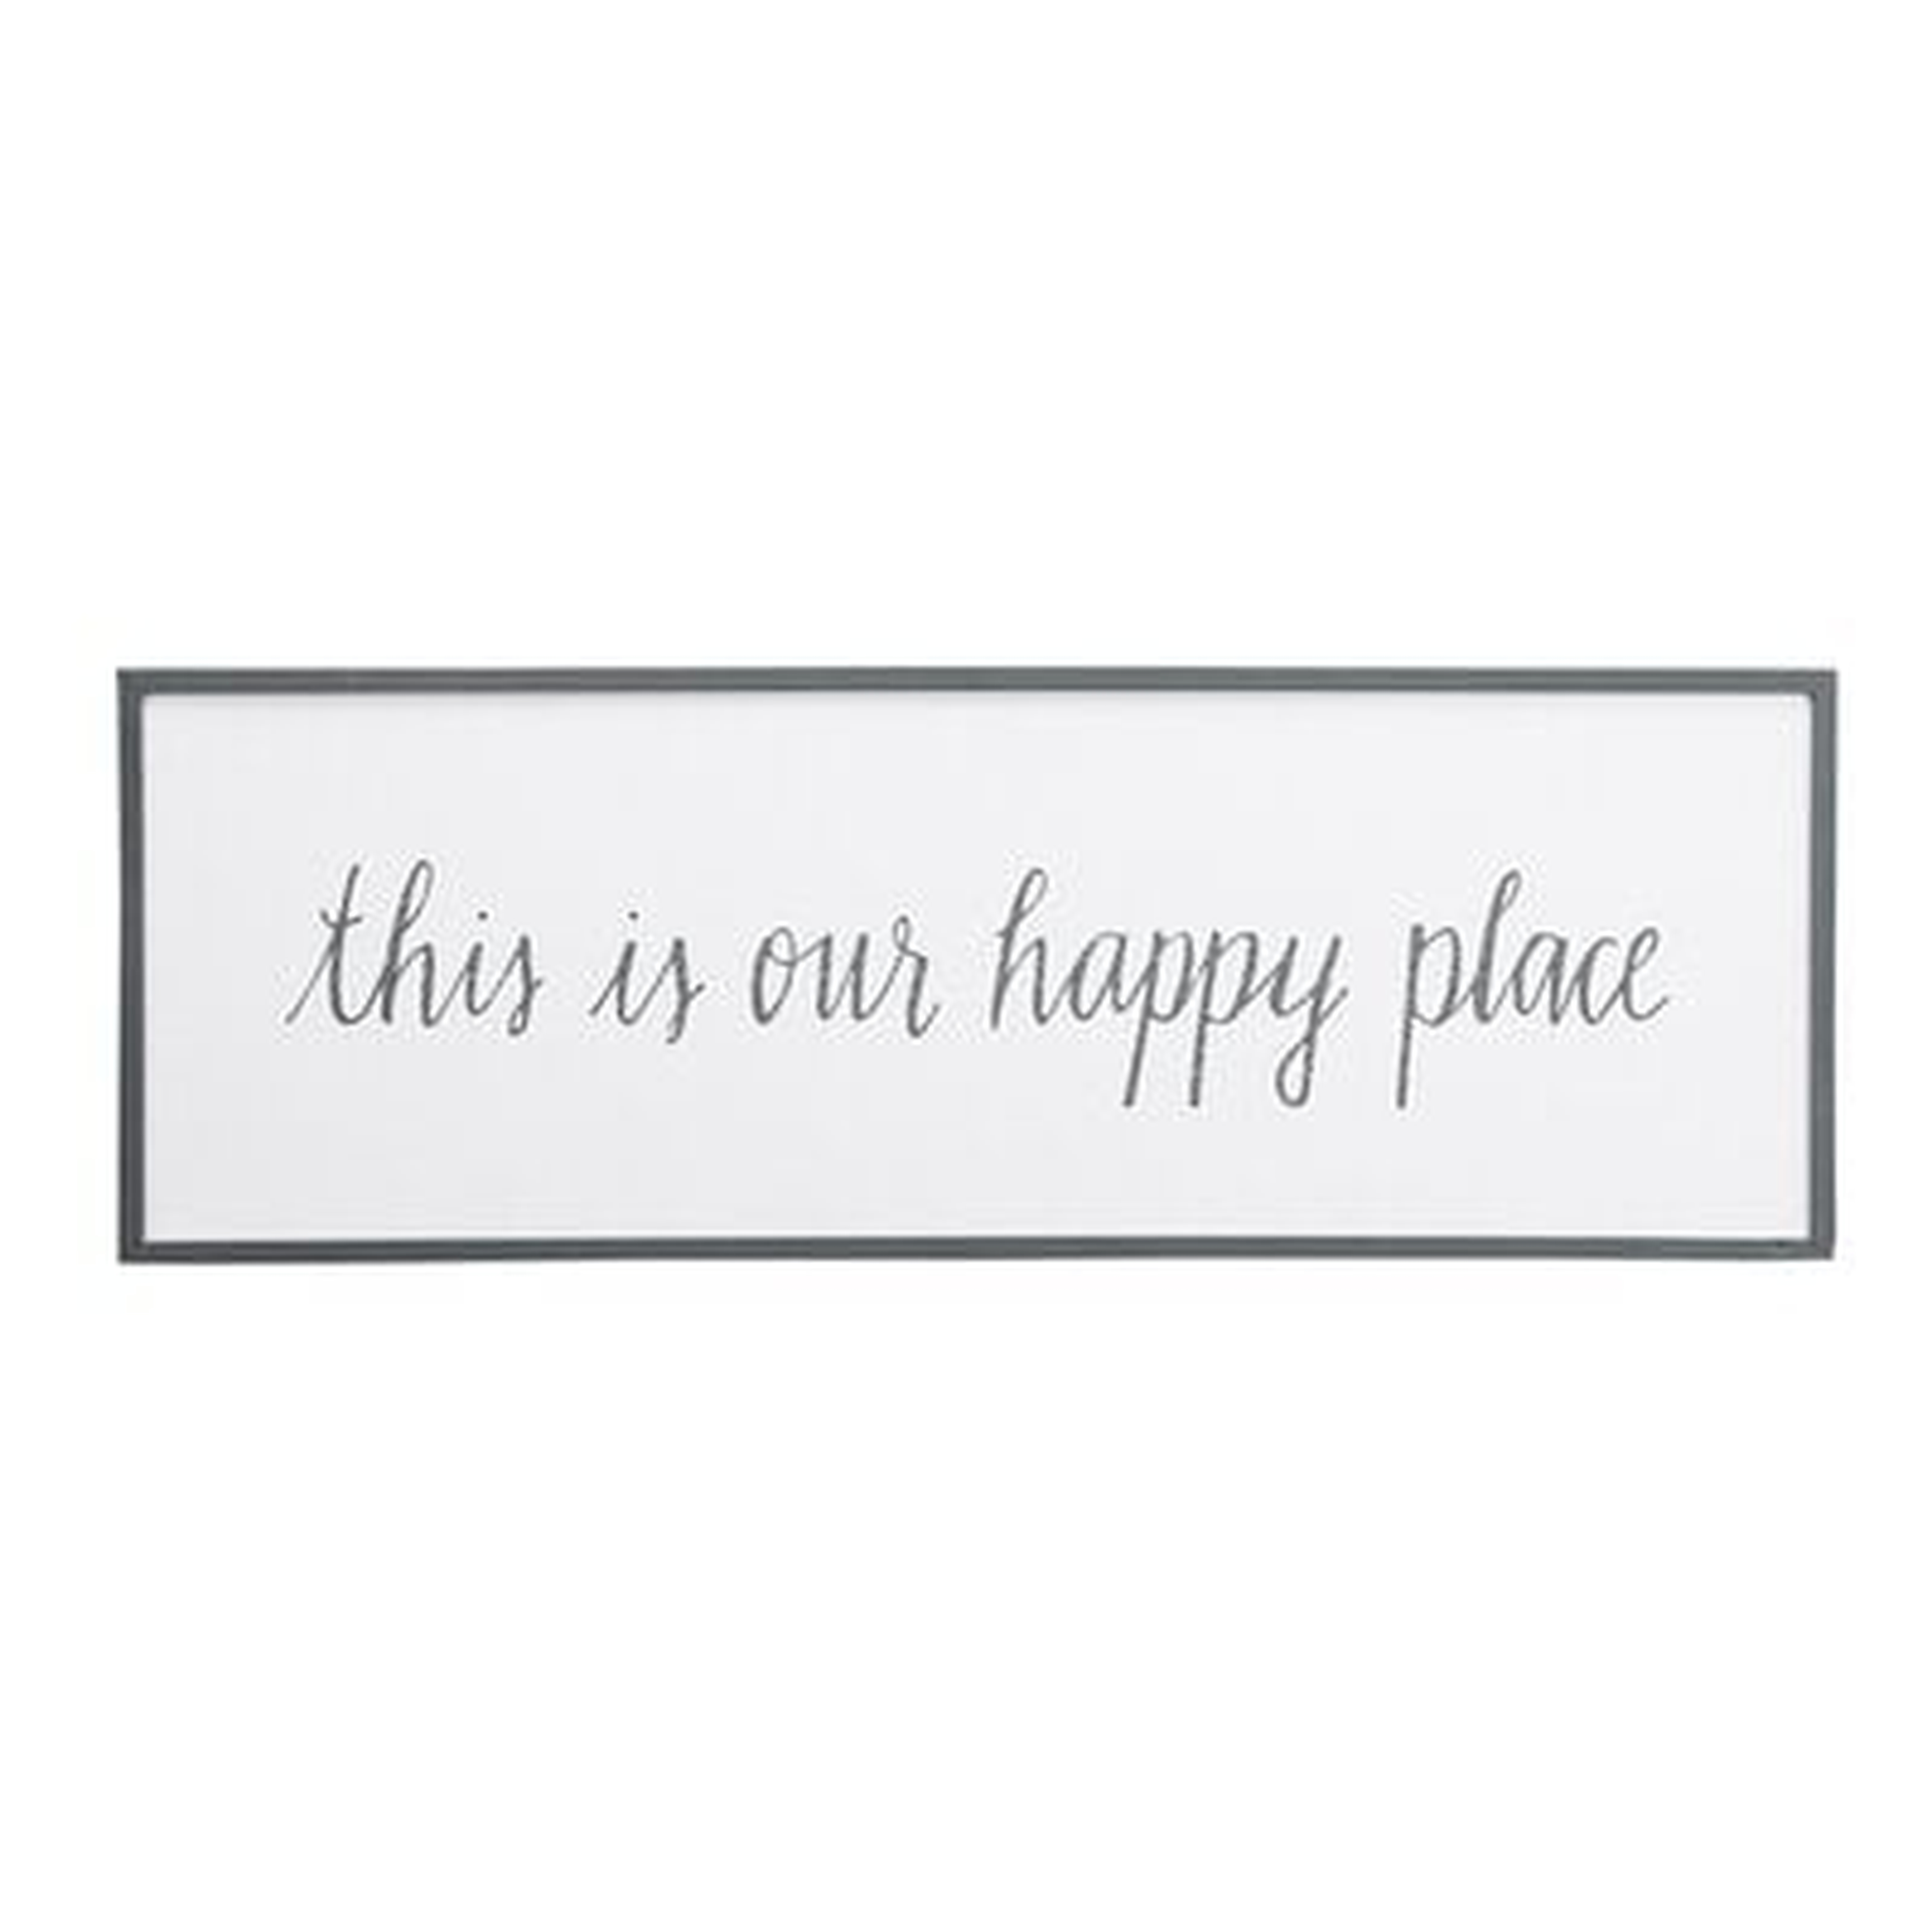 Our Happy Place - Picture Frame Textual Art Print on Wood - Birch Lane